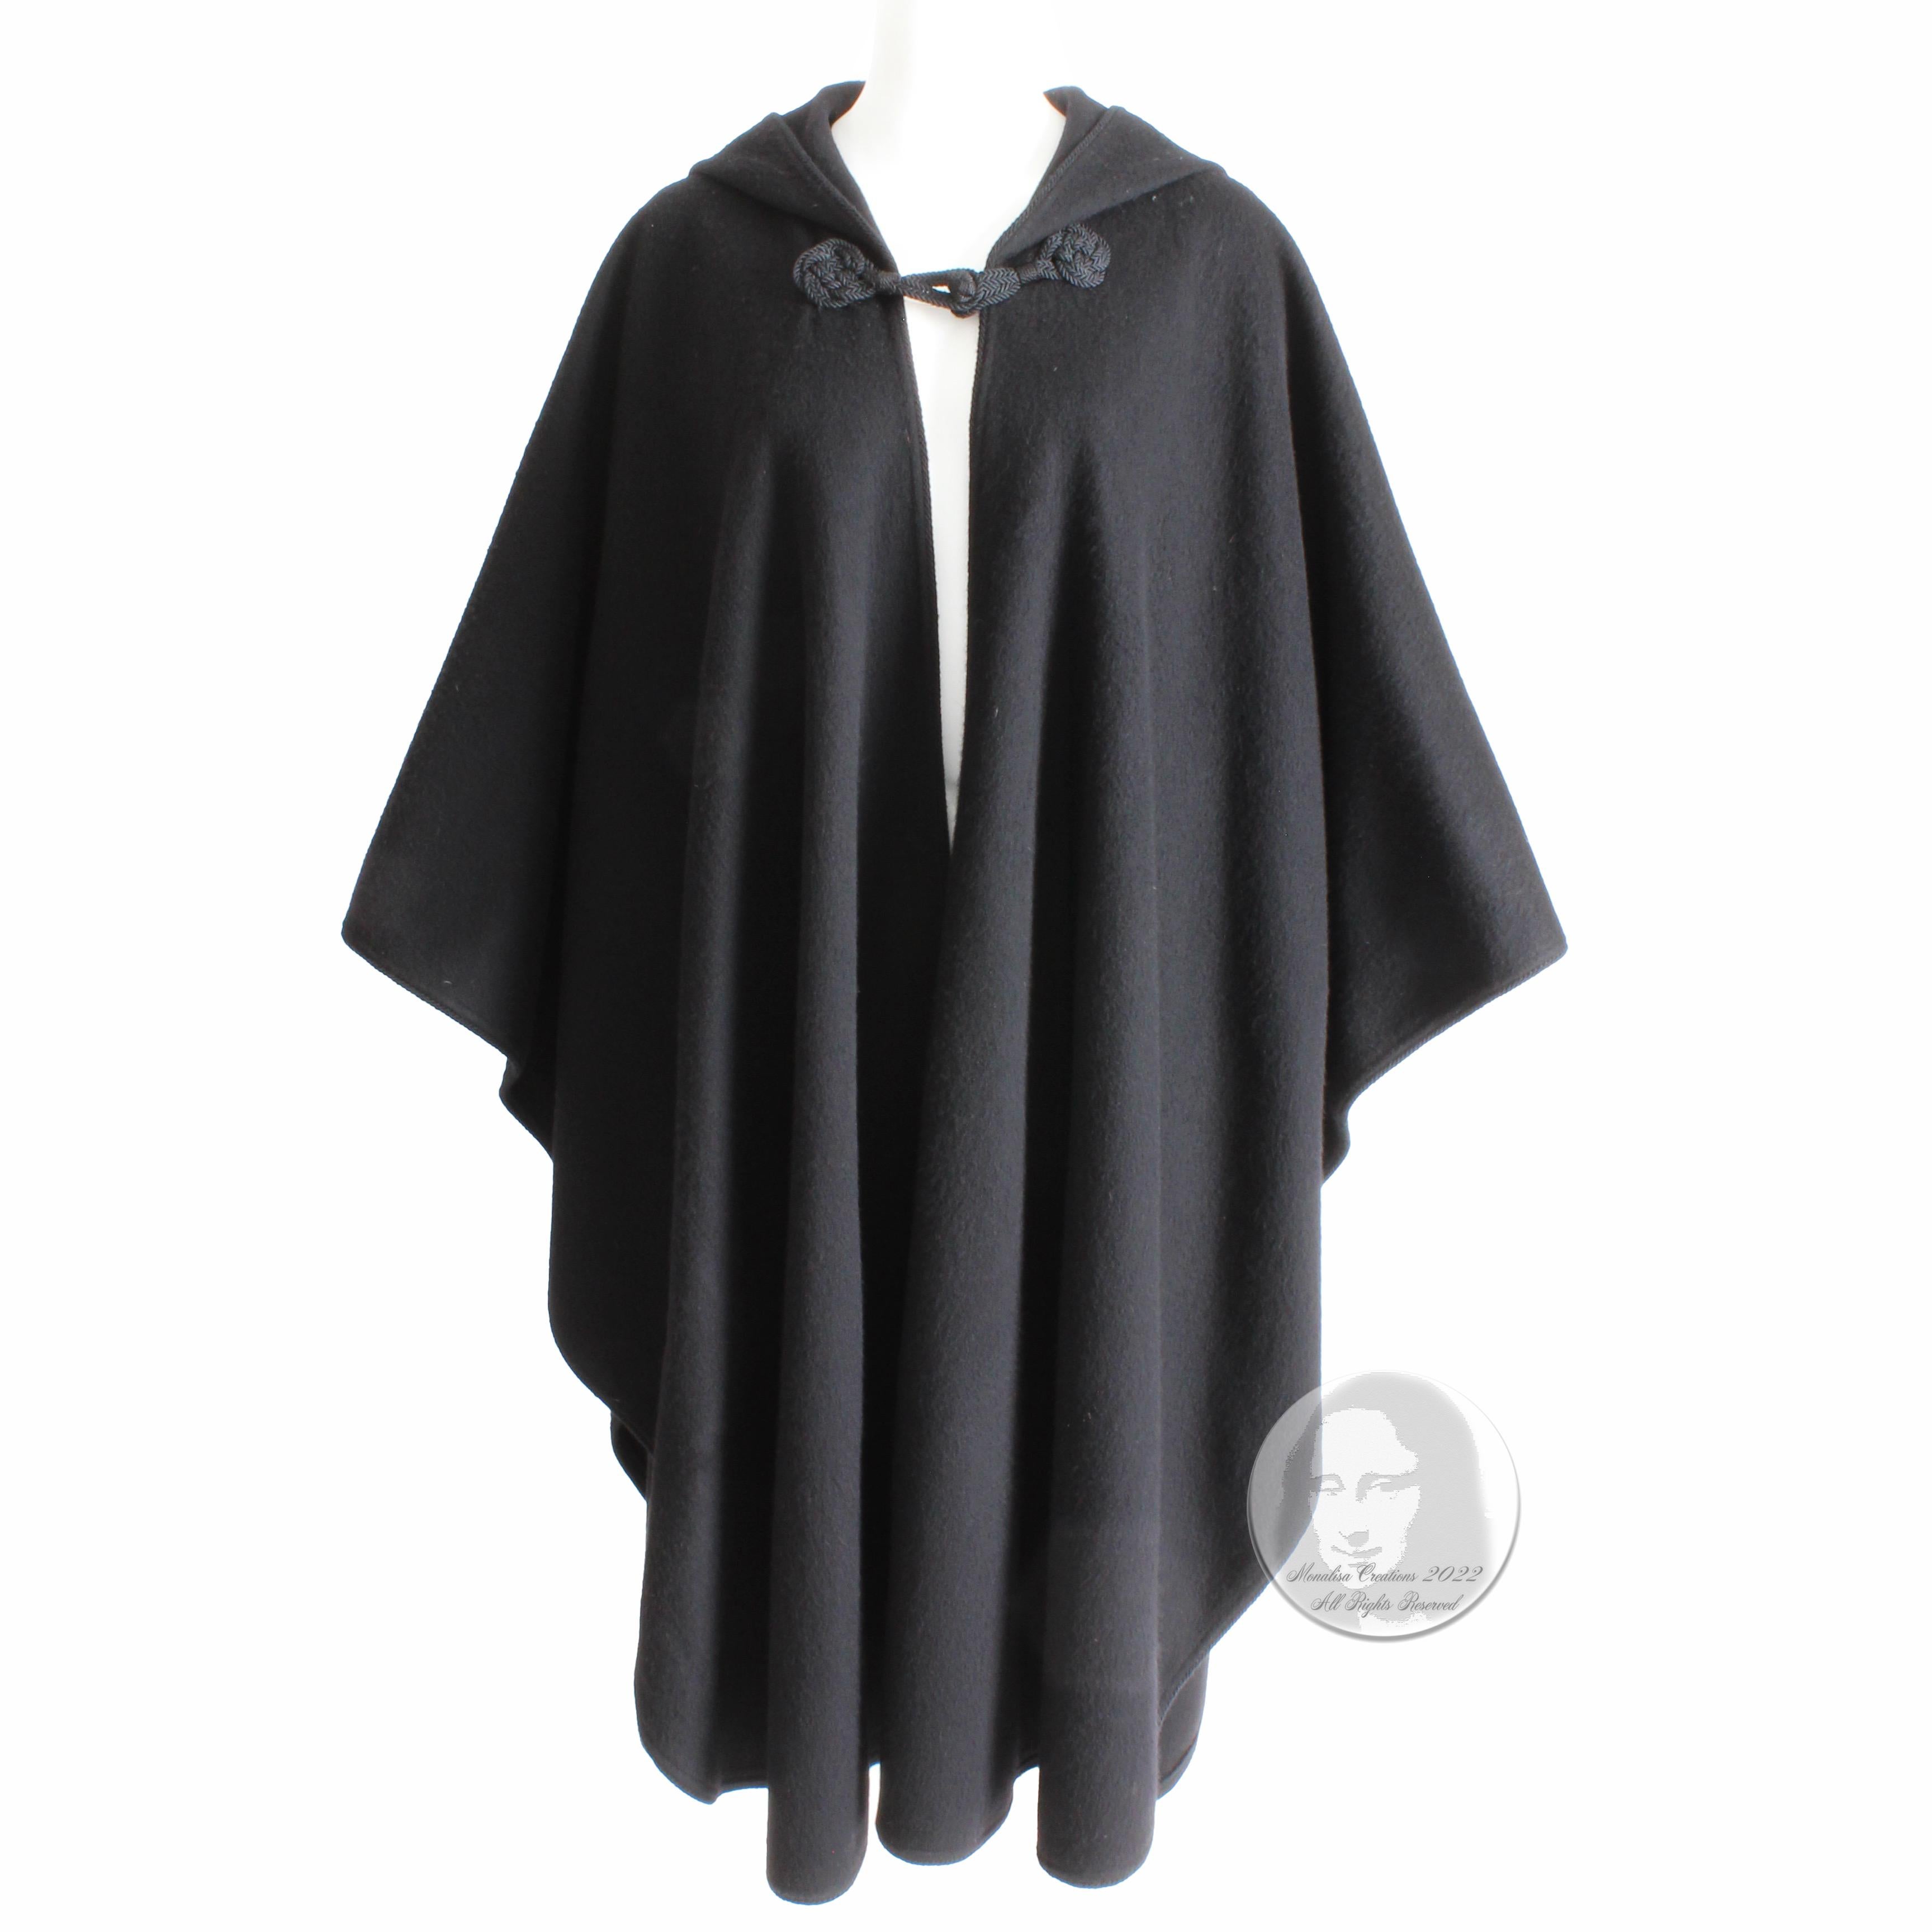 Authentic, preowned, vintage Yves Saint Laurent Rive Gauche Cape with Hood, from the 70s Ballet Russes collection (aka the Russian collection).  Made from what we believe is a cashmere/wool blend (no content label), it's trimmed in silky black